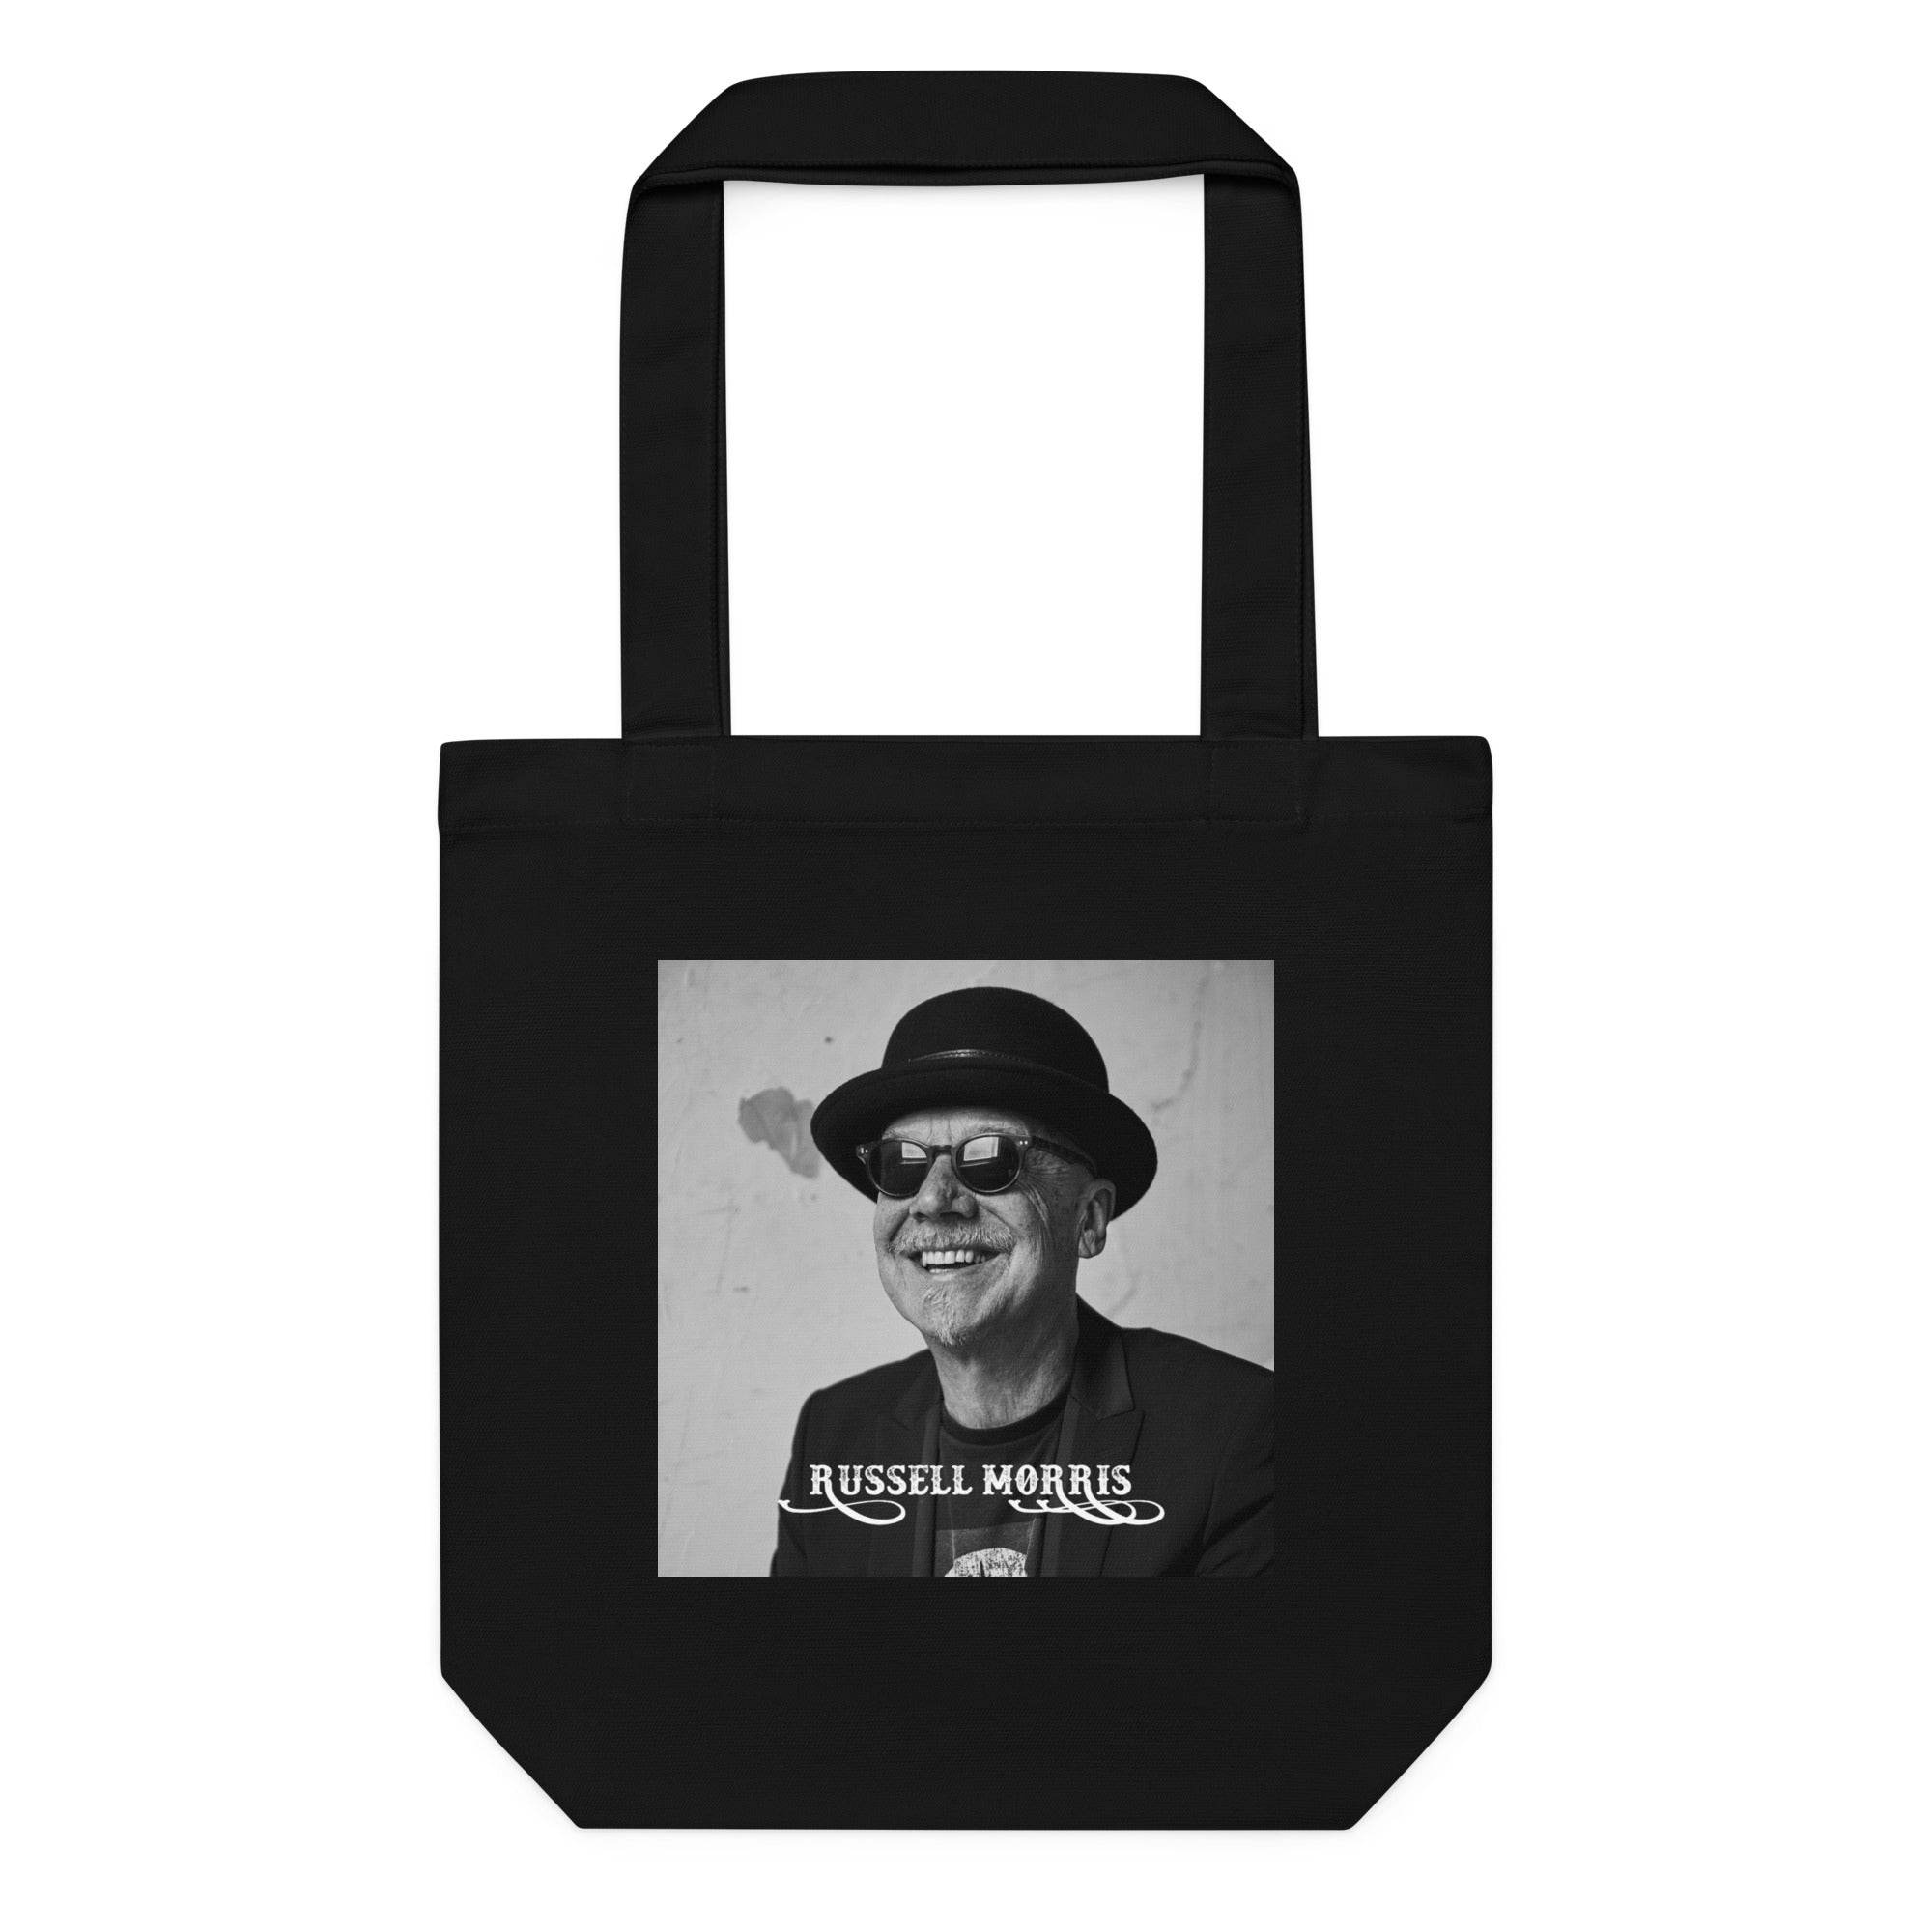 RUSSELL MORRIS - COTTON TOTE BAG